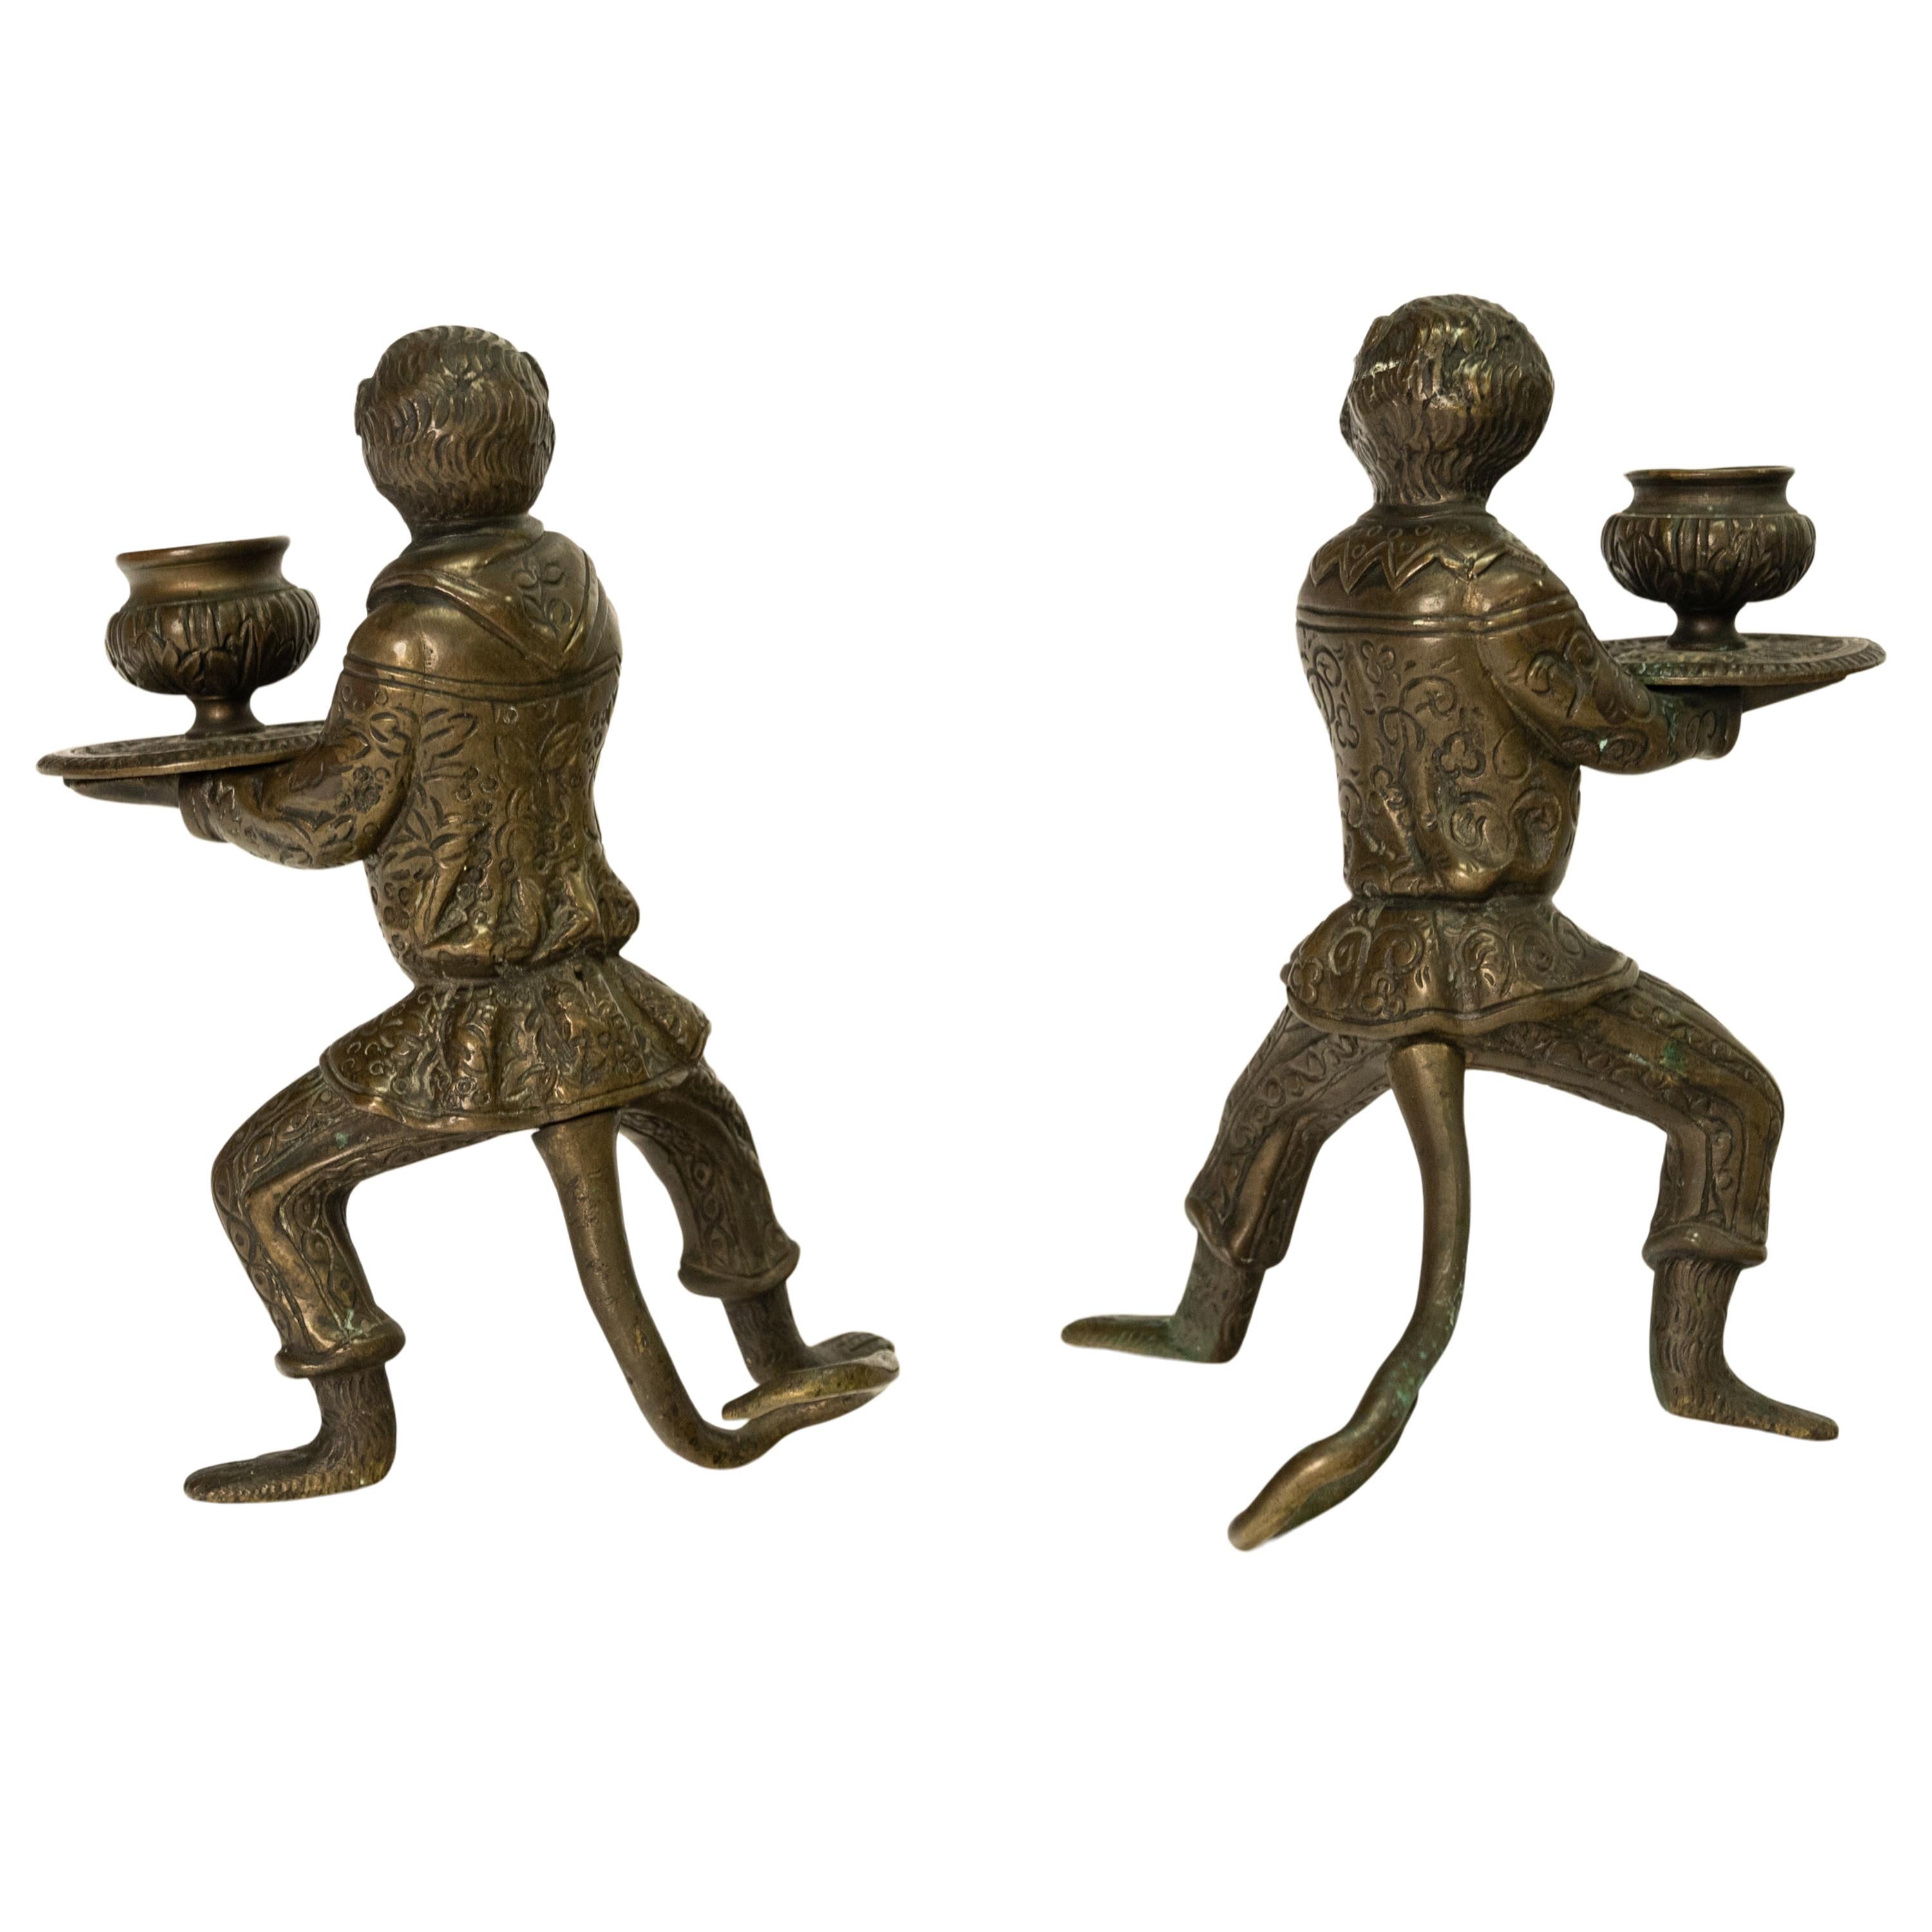 Pair Antique French Bronze Figural Monkey Statue Candleholders Candlesticks 1900 In Good Condition For Sale In Portland, OR